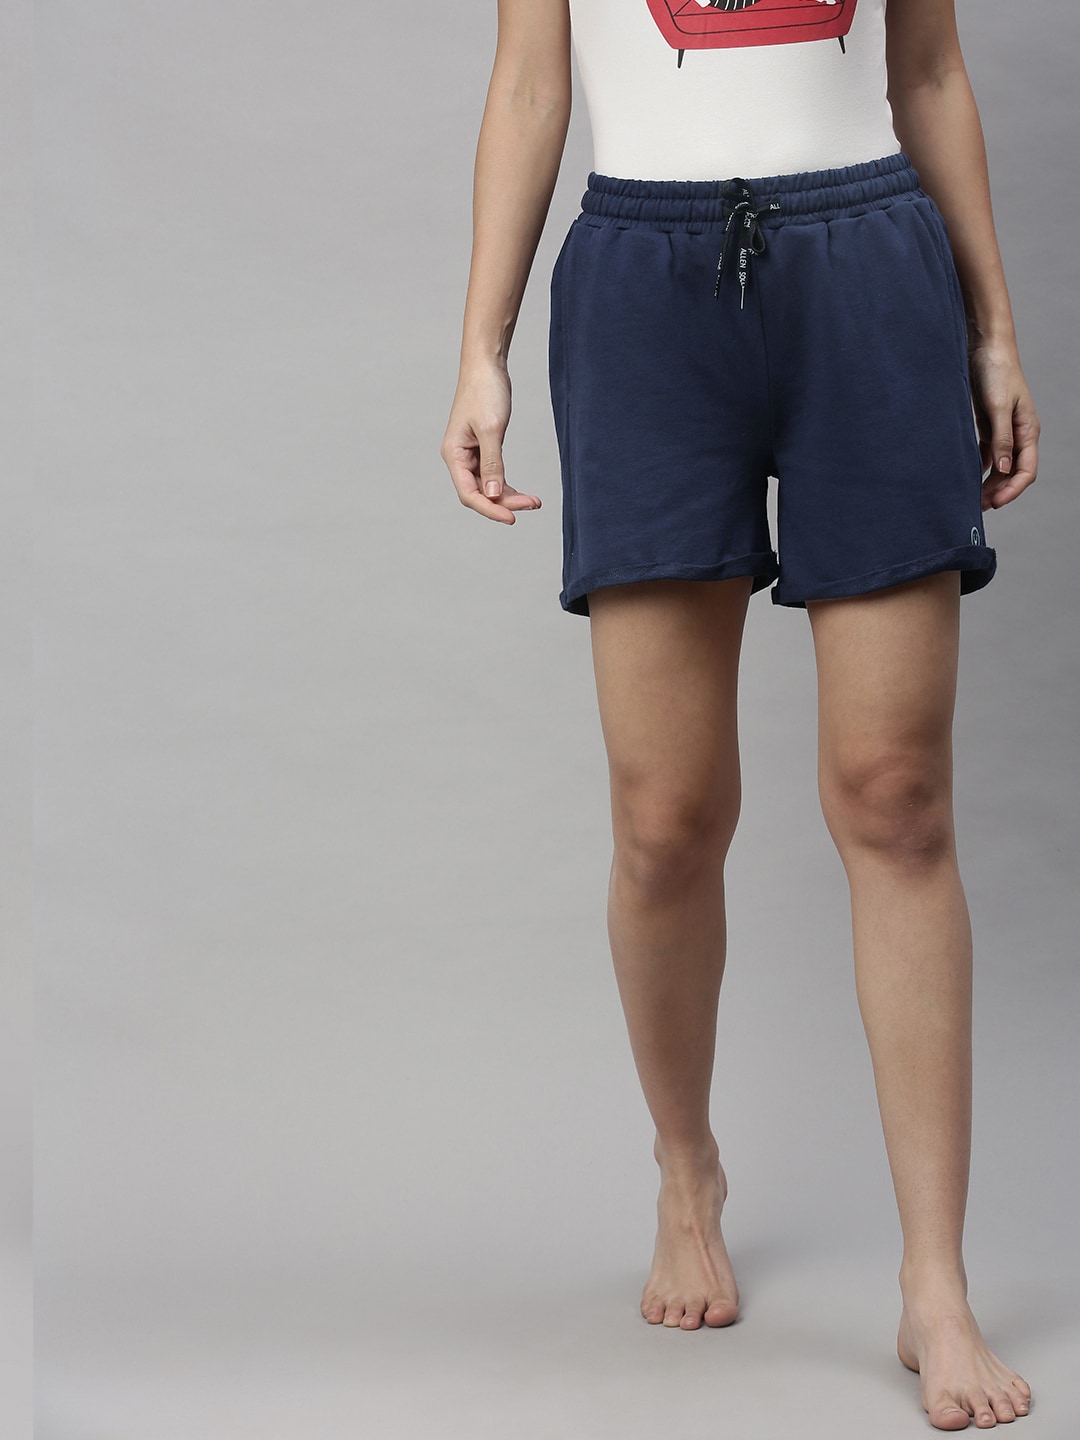 Allen Solly Woman Navy Blue Solid Pure Cotton Lounge Shorts Price in India